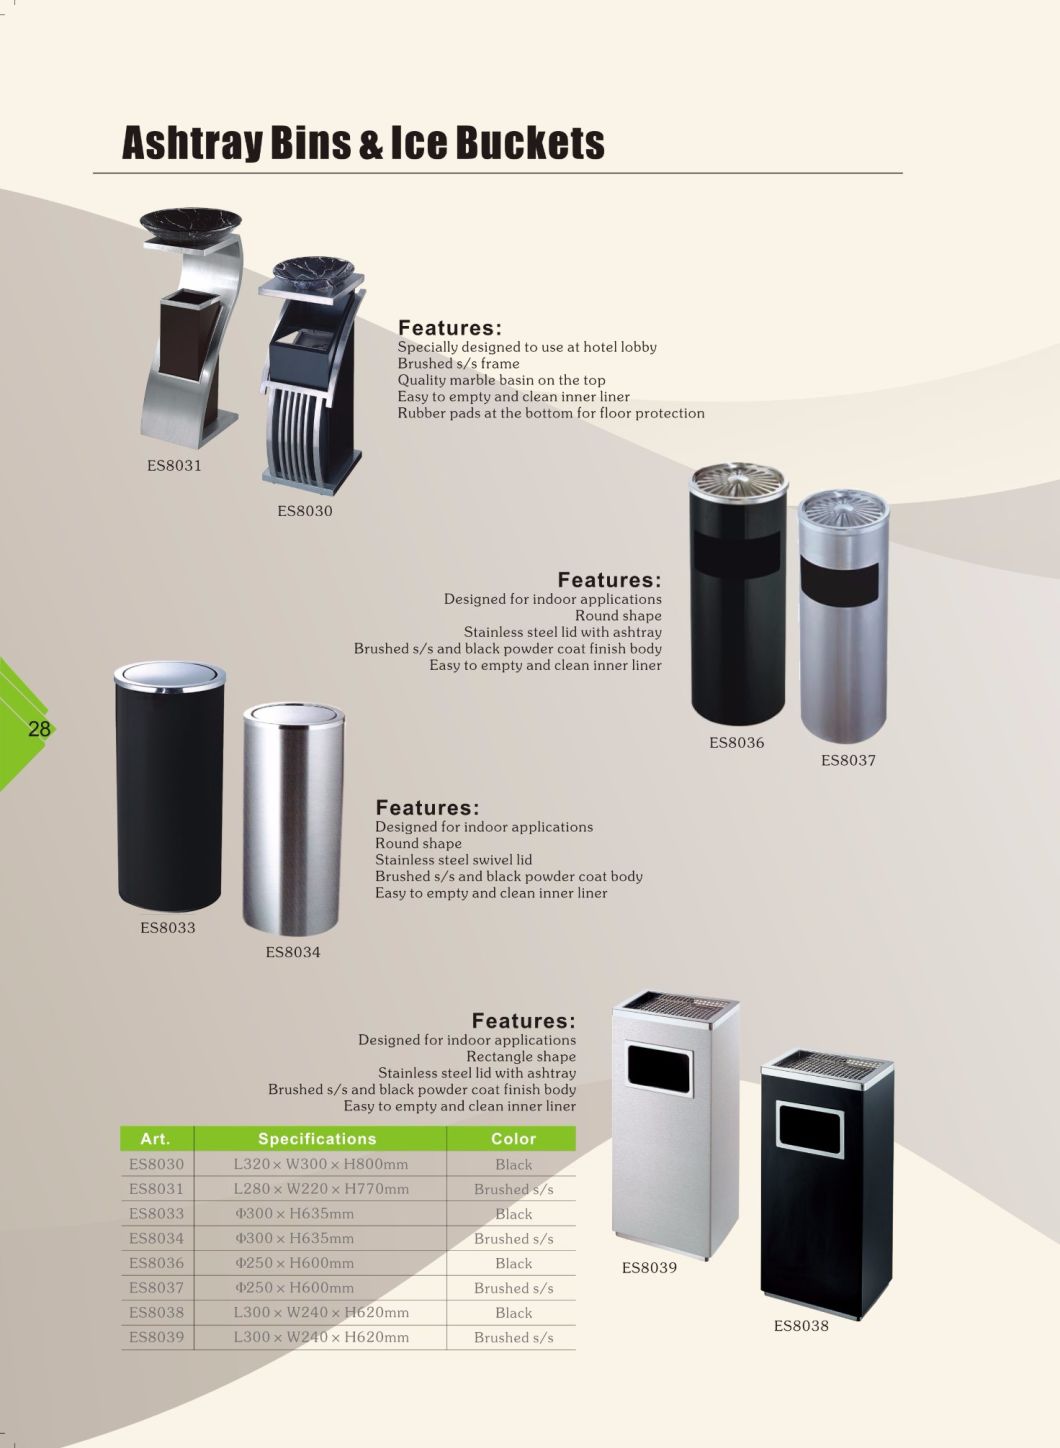 3L Stainless Steel Pedal Waste Bin with Inner Plastic Layer